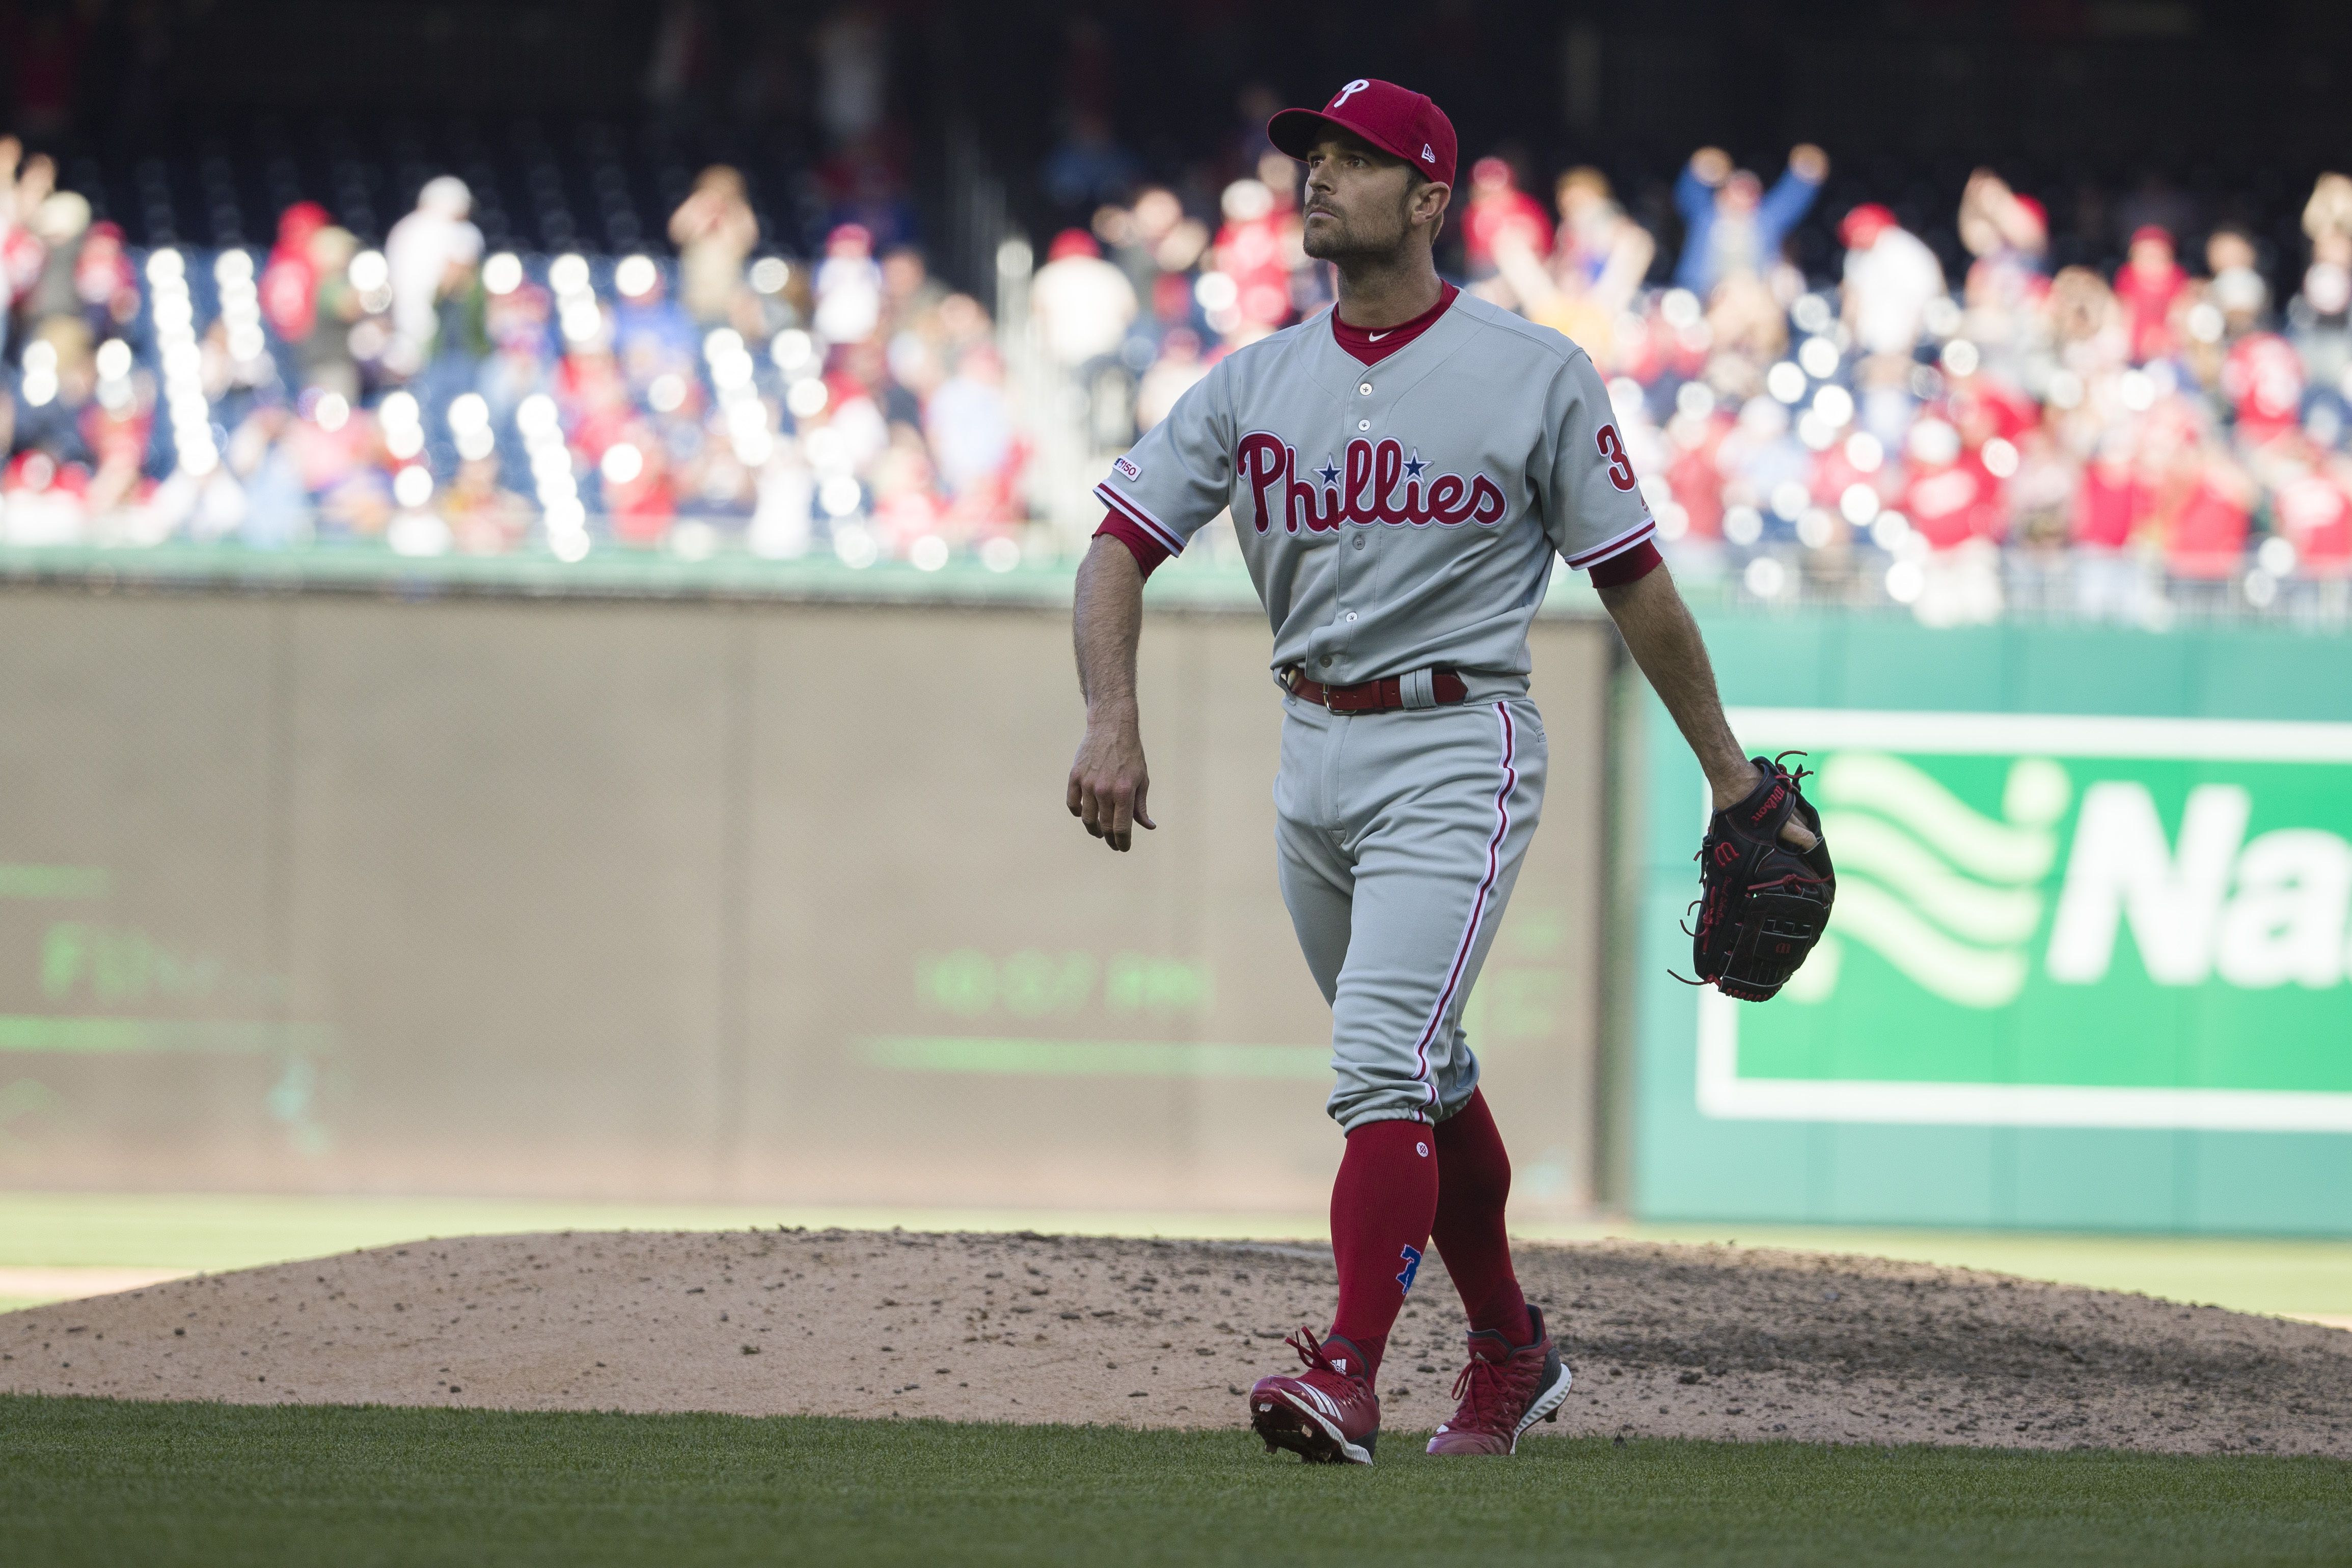 Phillies will face Jake Arrieta on Tuesday as the former Phillie